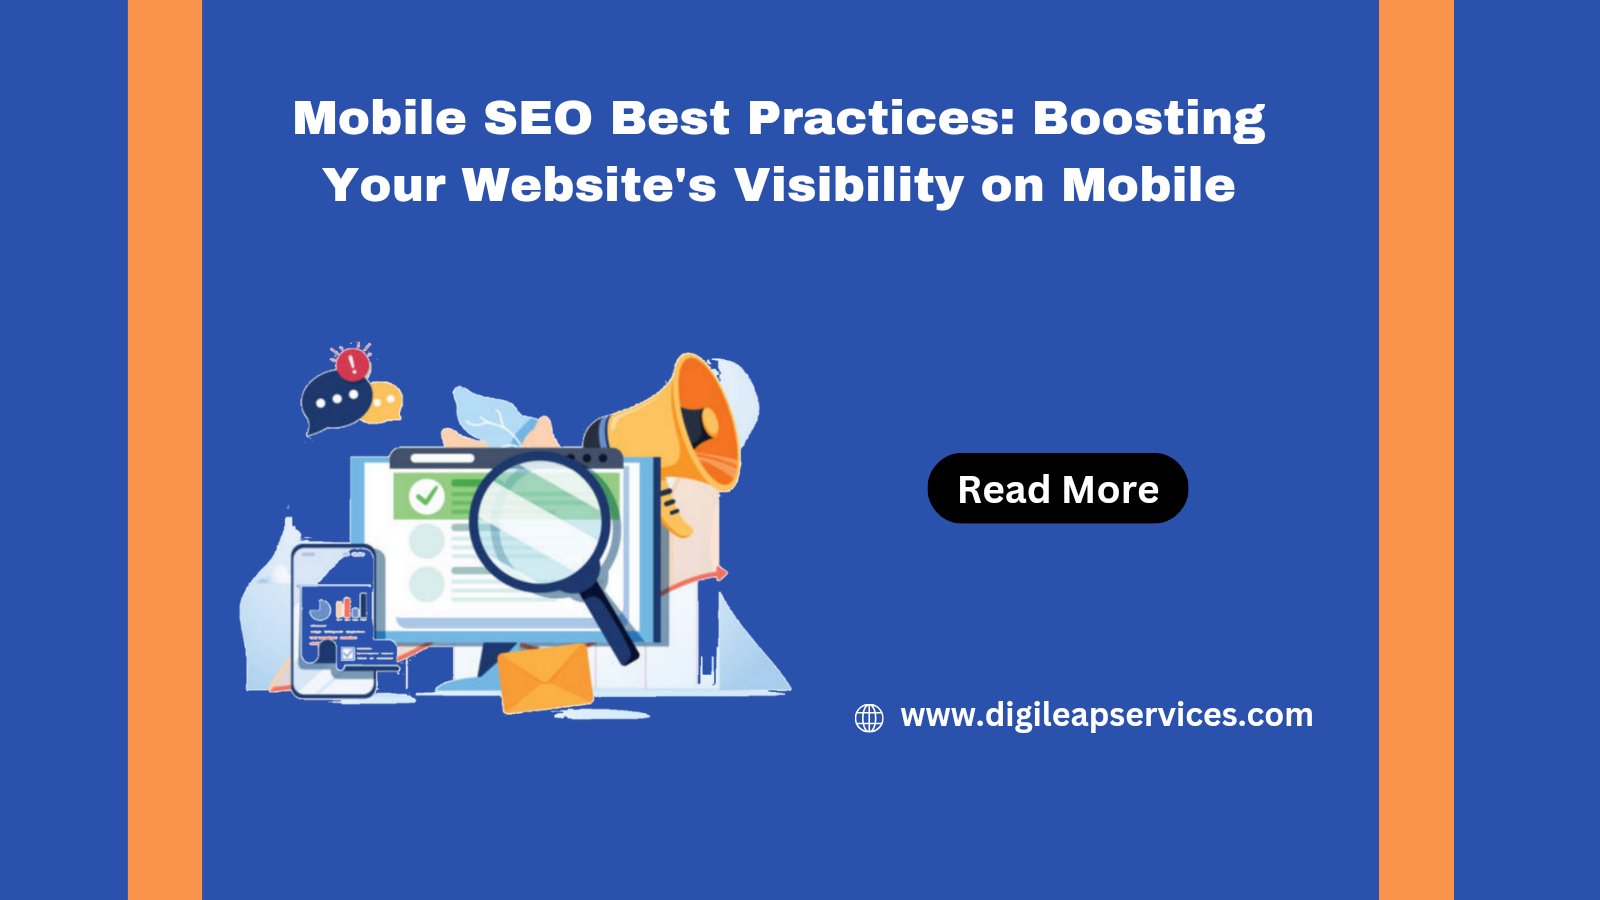 Mobile SEO Best Practices: Boost Your Website's Visibility